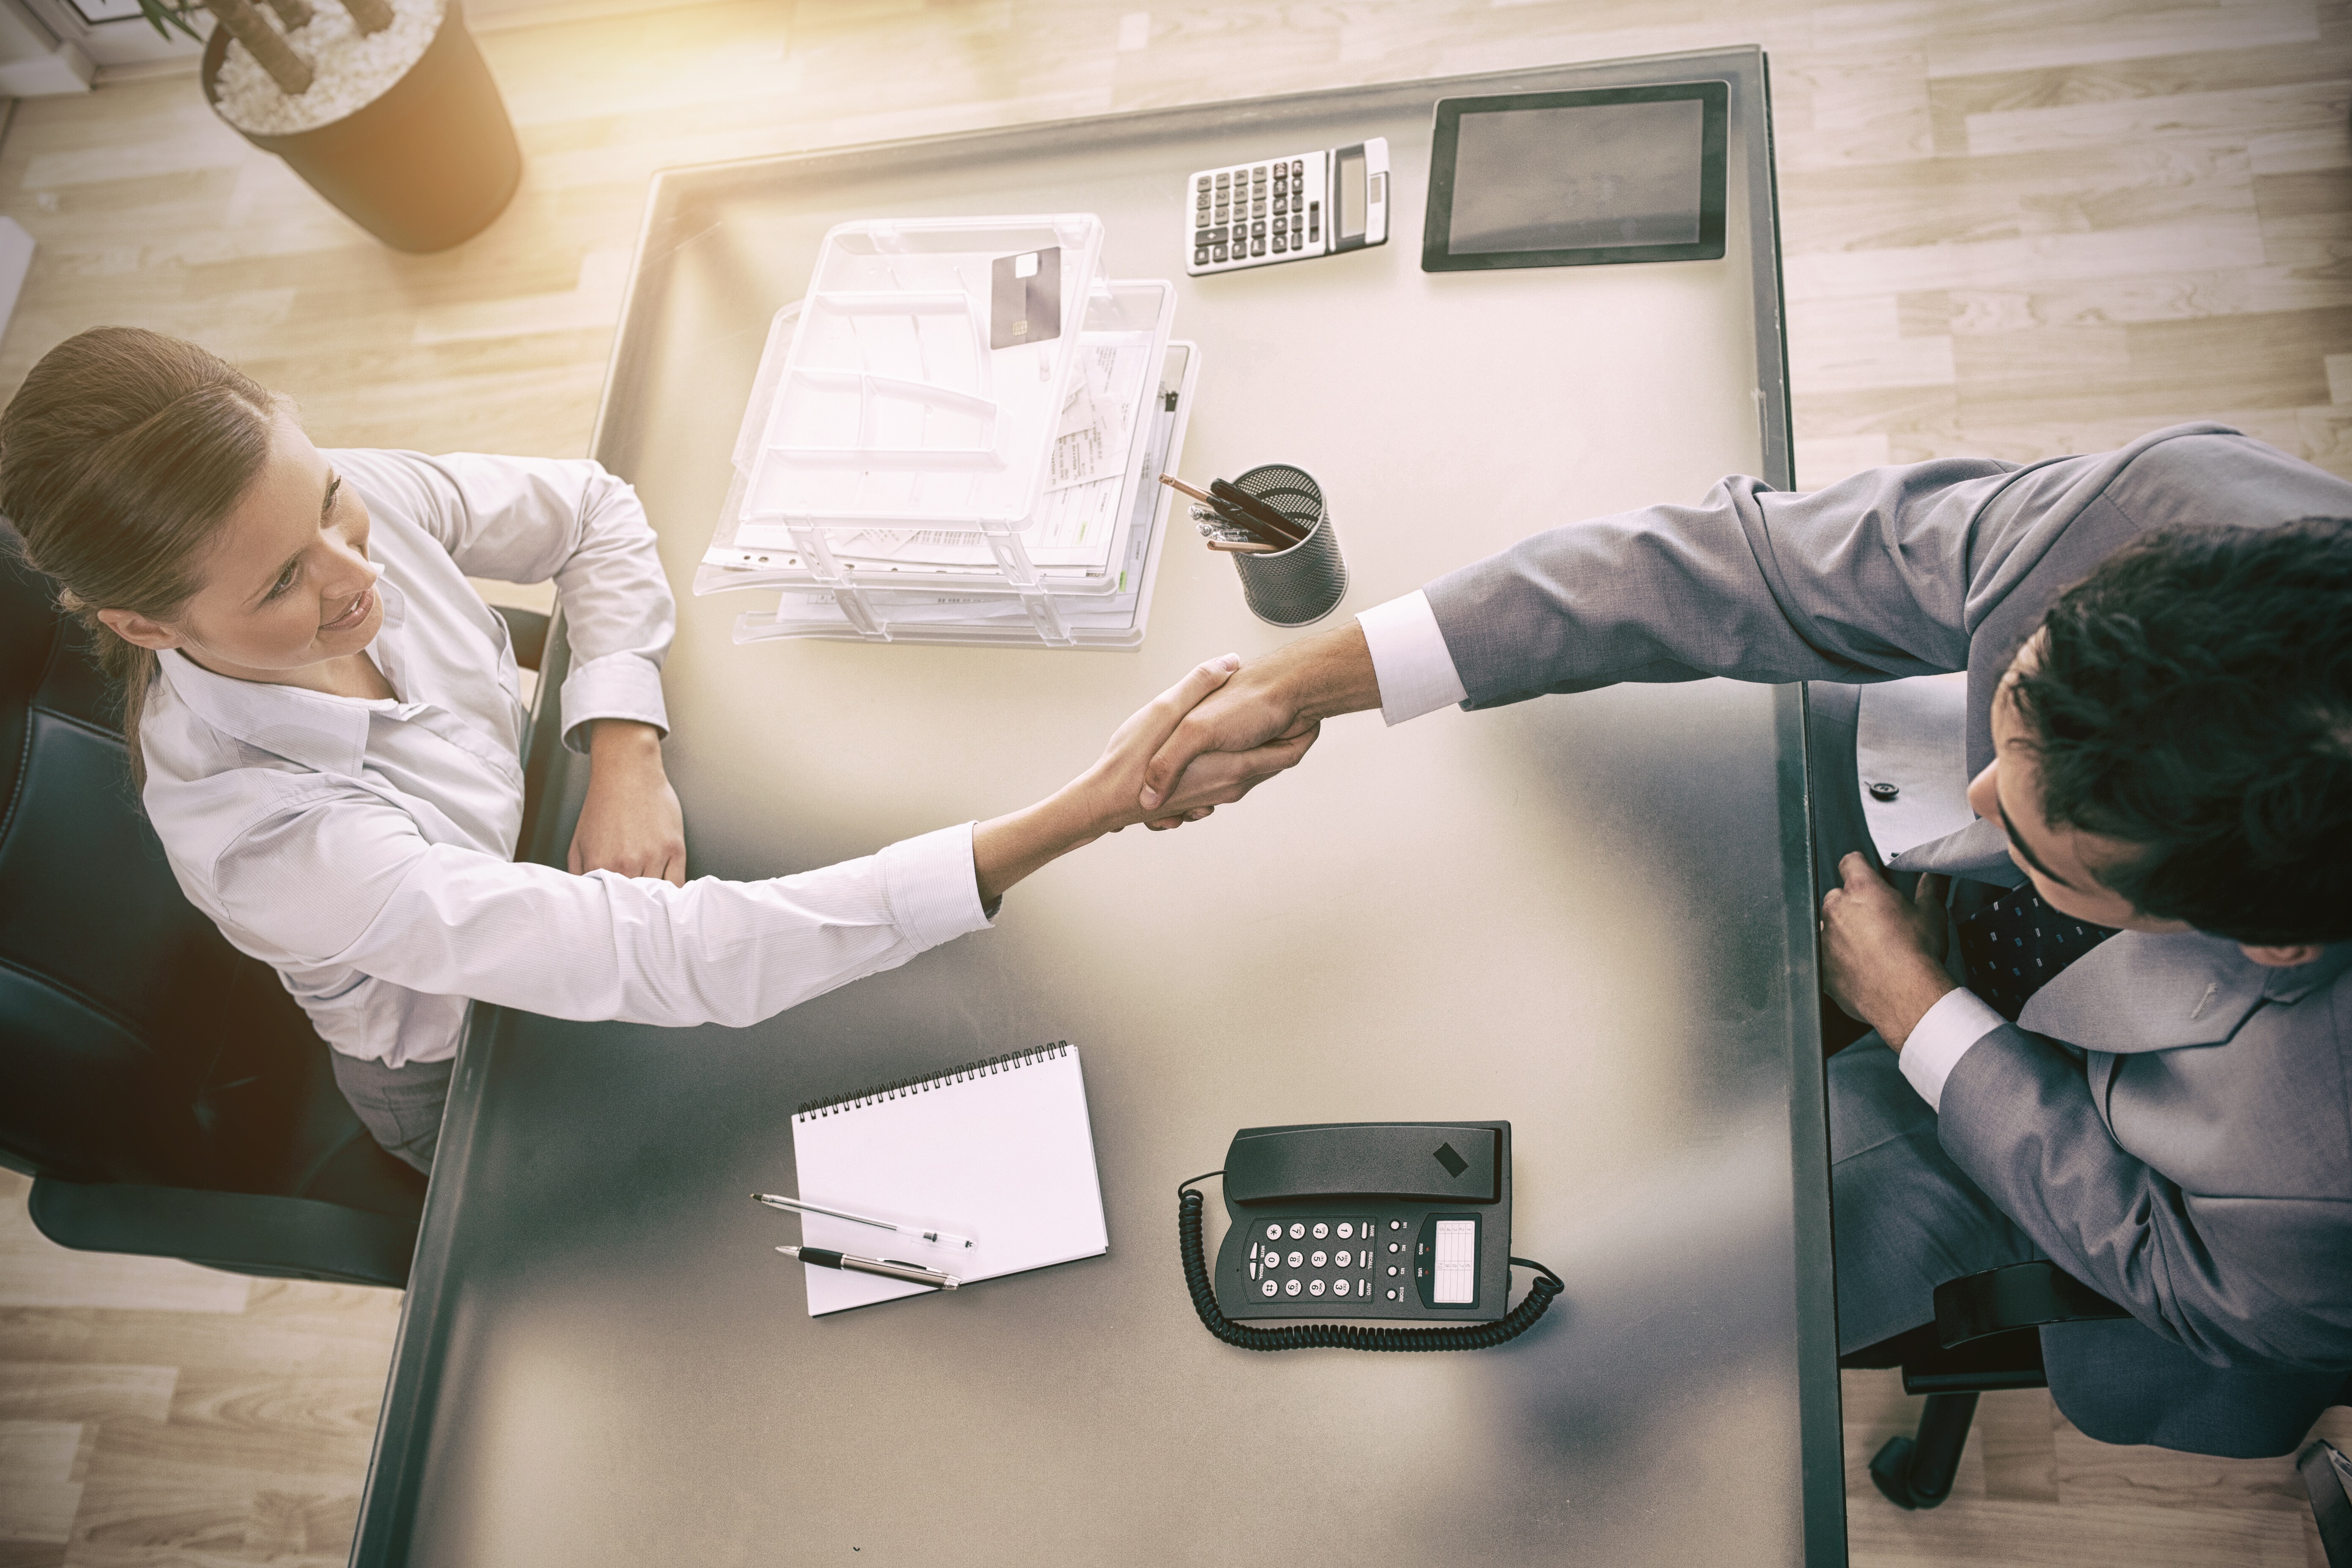 Aerial view of a modern business meeting between a man and a woman, shaking hands from two opposing sides of a desk.